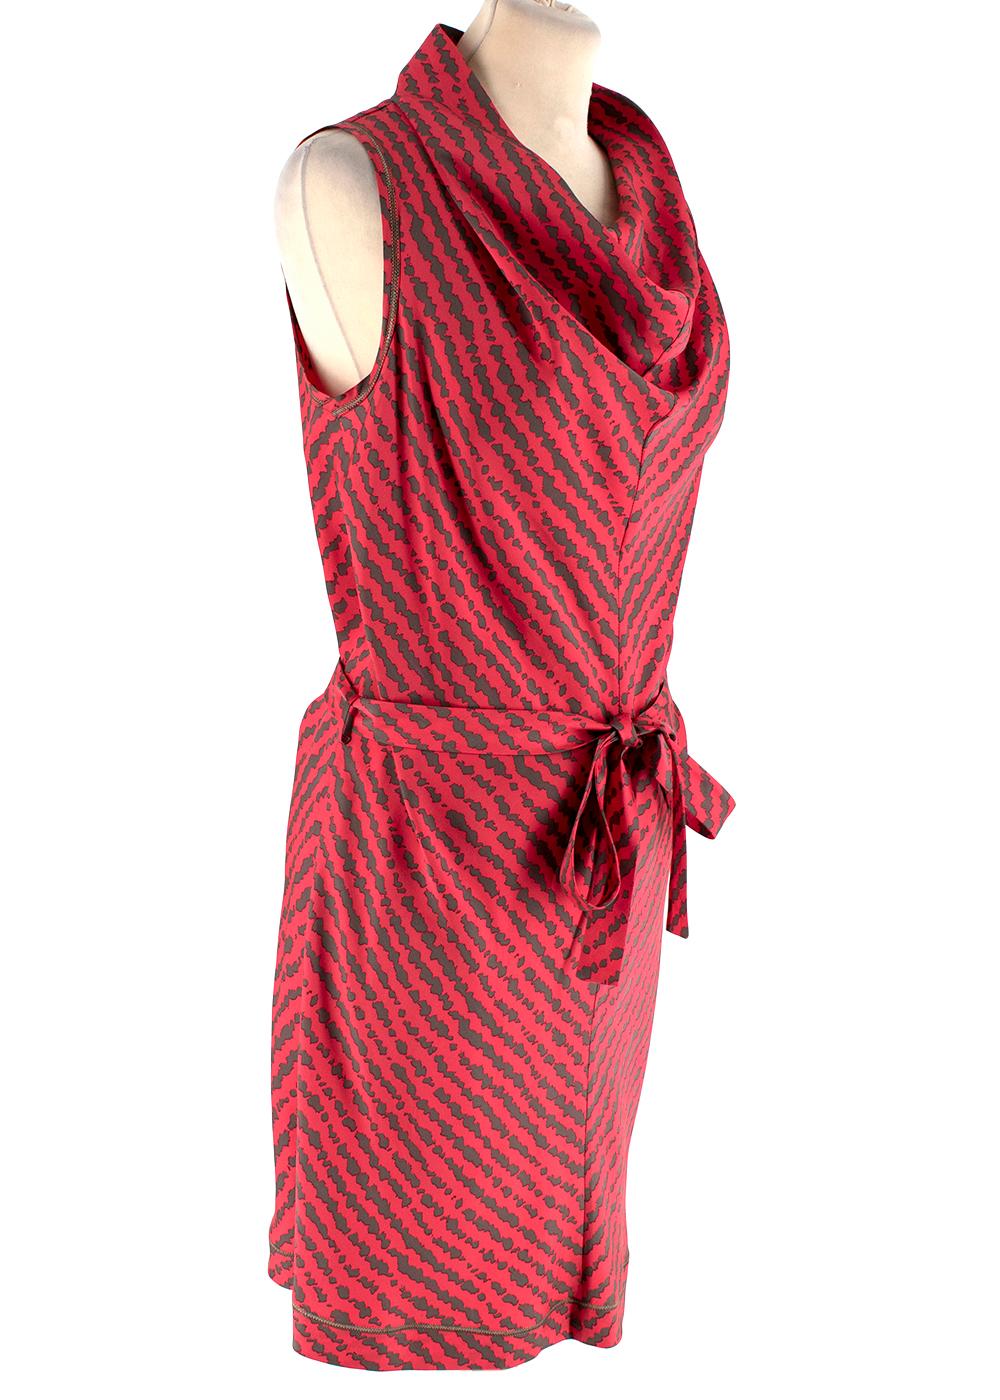 Missoni Hot Pink Printed Silk Sleeveless Midi Shift Dress

- Hot pink printed dress
- Midi length
- Lightweight pure silk 
- Sleeveless style 
- Cowl neck 
- Tie waist belt 
- Covered buttons at back of neck 
- Slip on style 

Materials: 
100% Silk